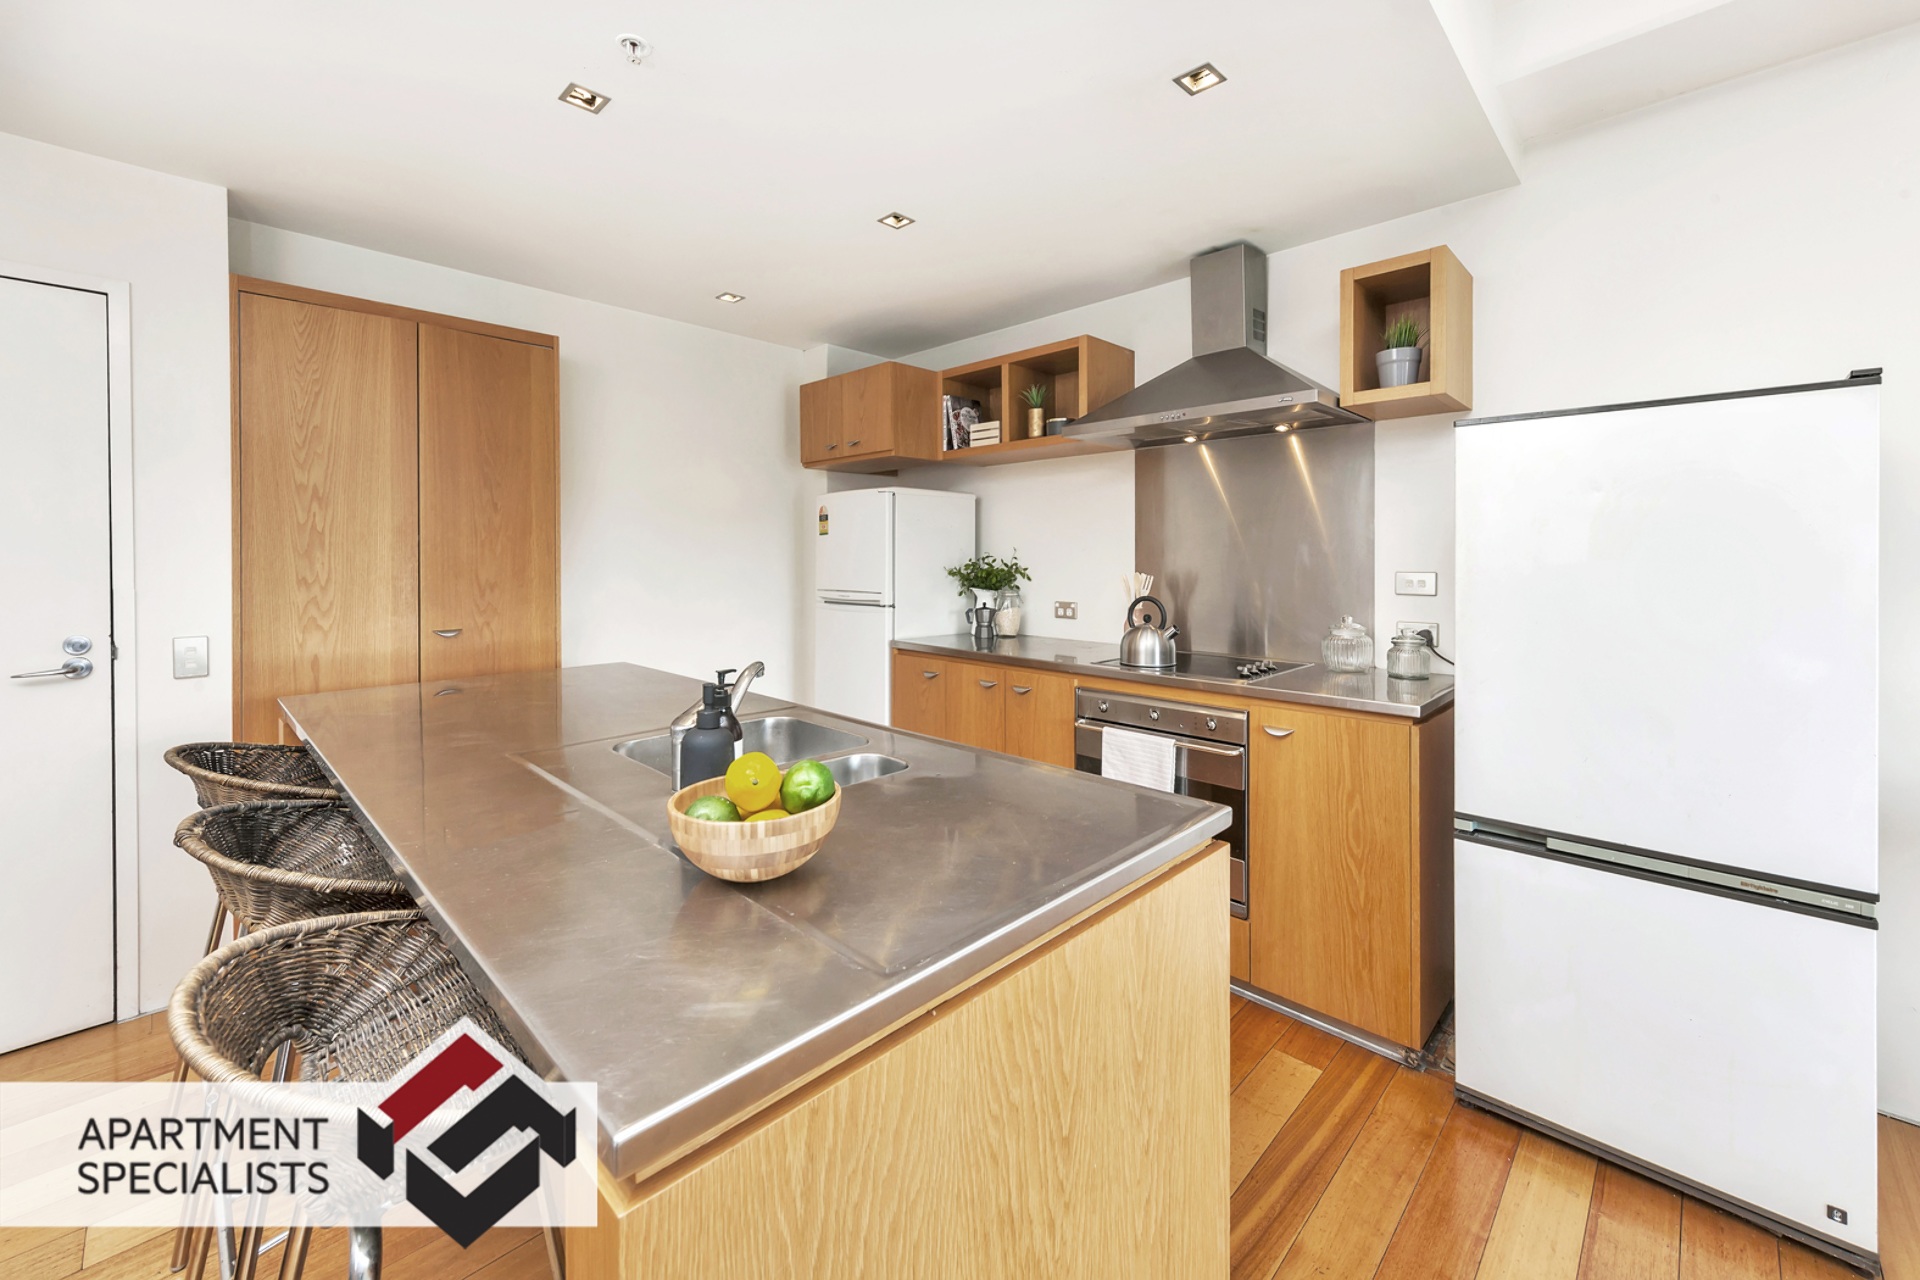 4 | 10 Ronayne Street, Parnell | Apartment Specialists